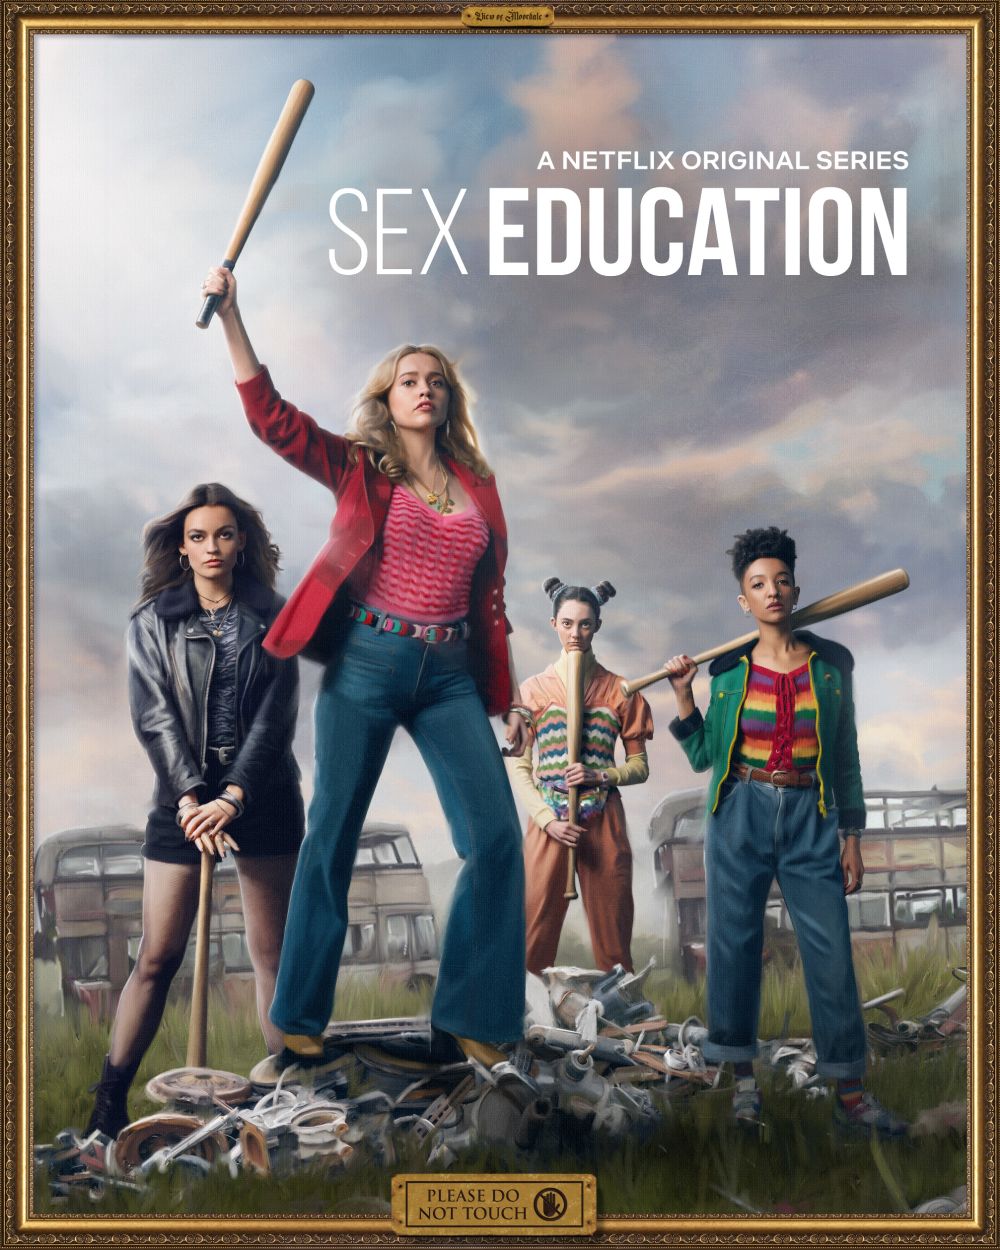 A promotional portrait of four female characters from the Netflix series, Sex Education, holding baseball bats.